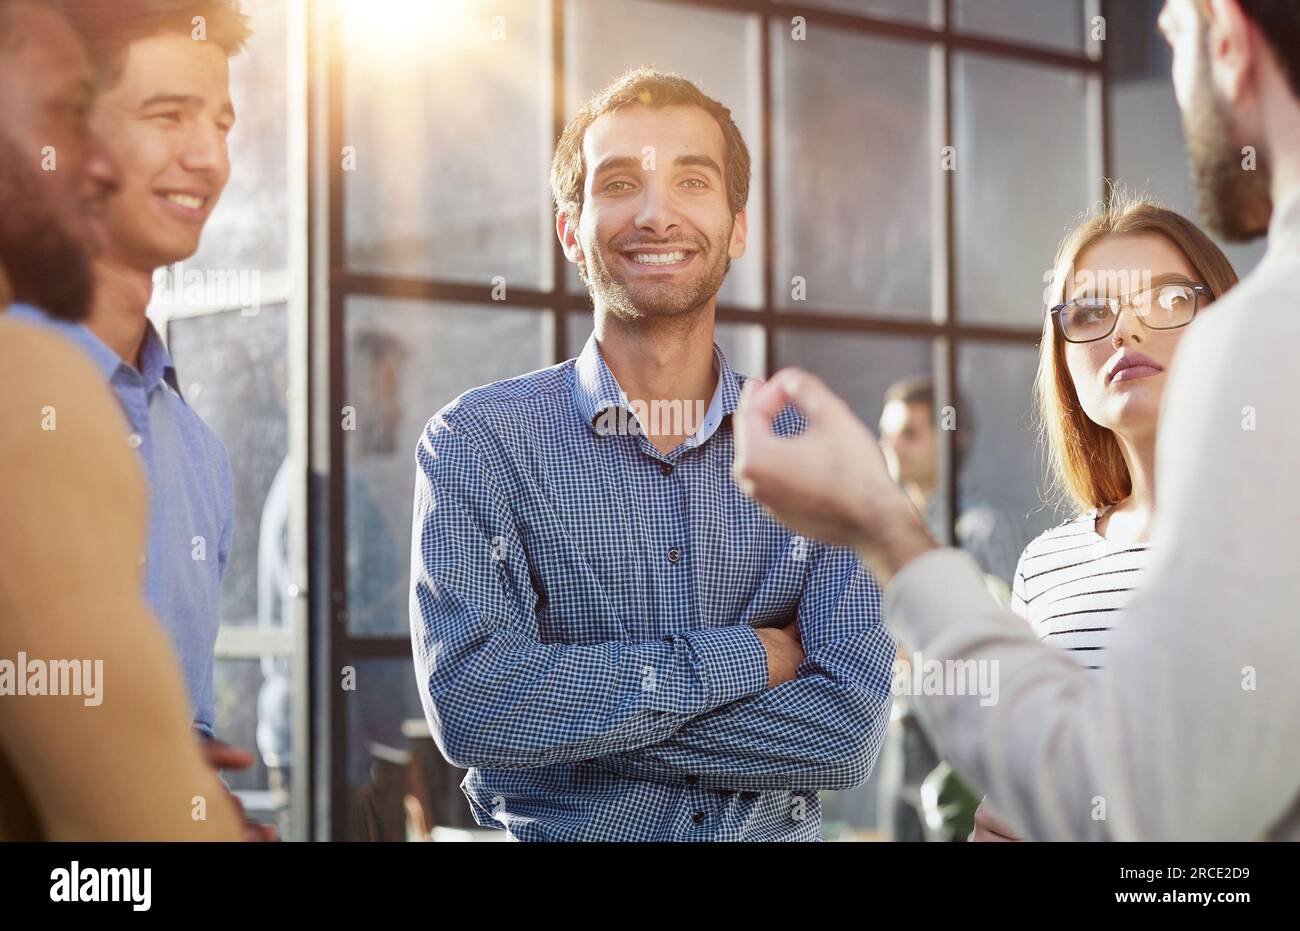 Business conversations of different people during an office walk. business concept Stock Photo